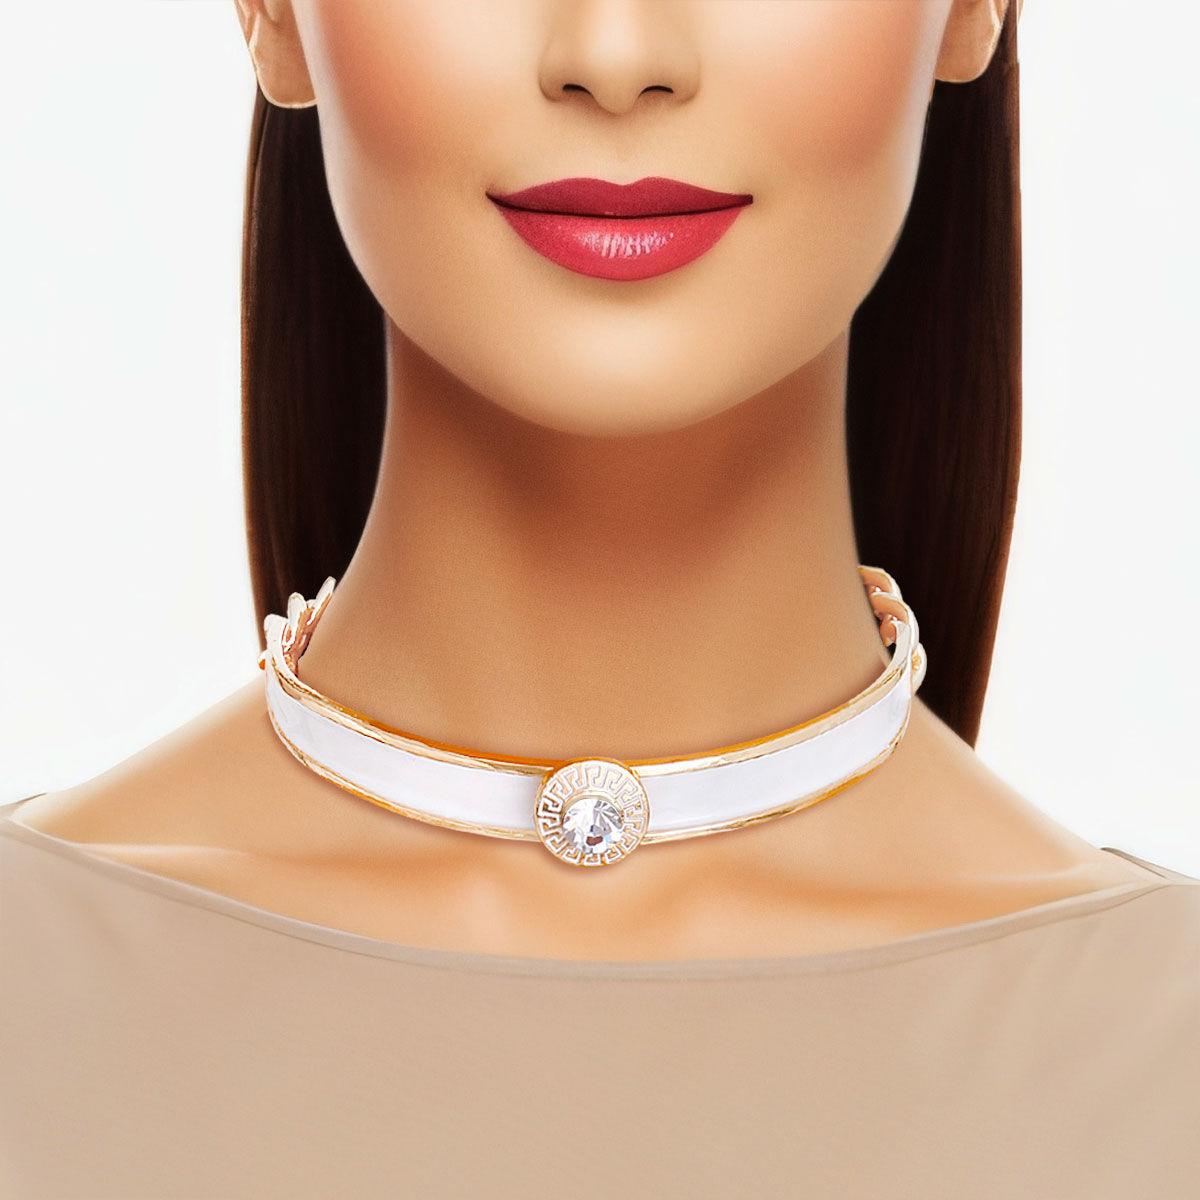 Chic White Choker Necklace Adorned with Gold/Clear Medallion